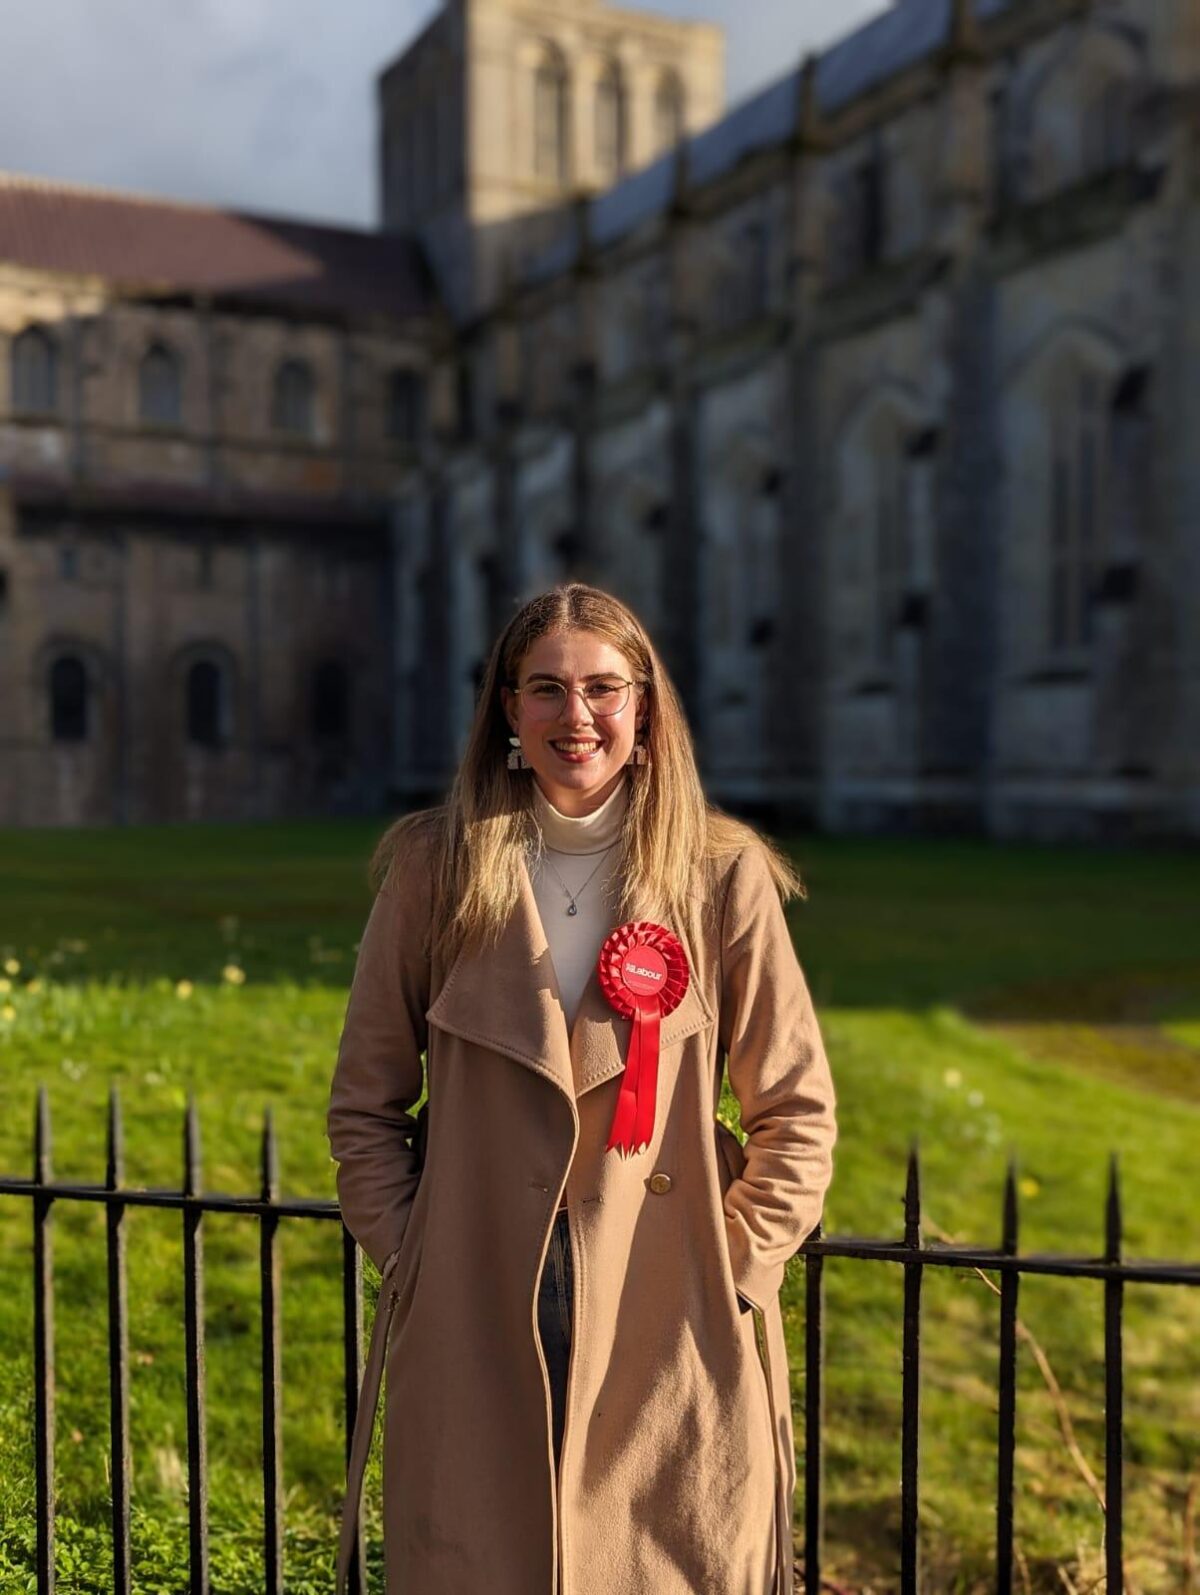 Hannah Dawson is your Parliamentary Candidate for the next general election